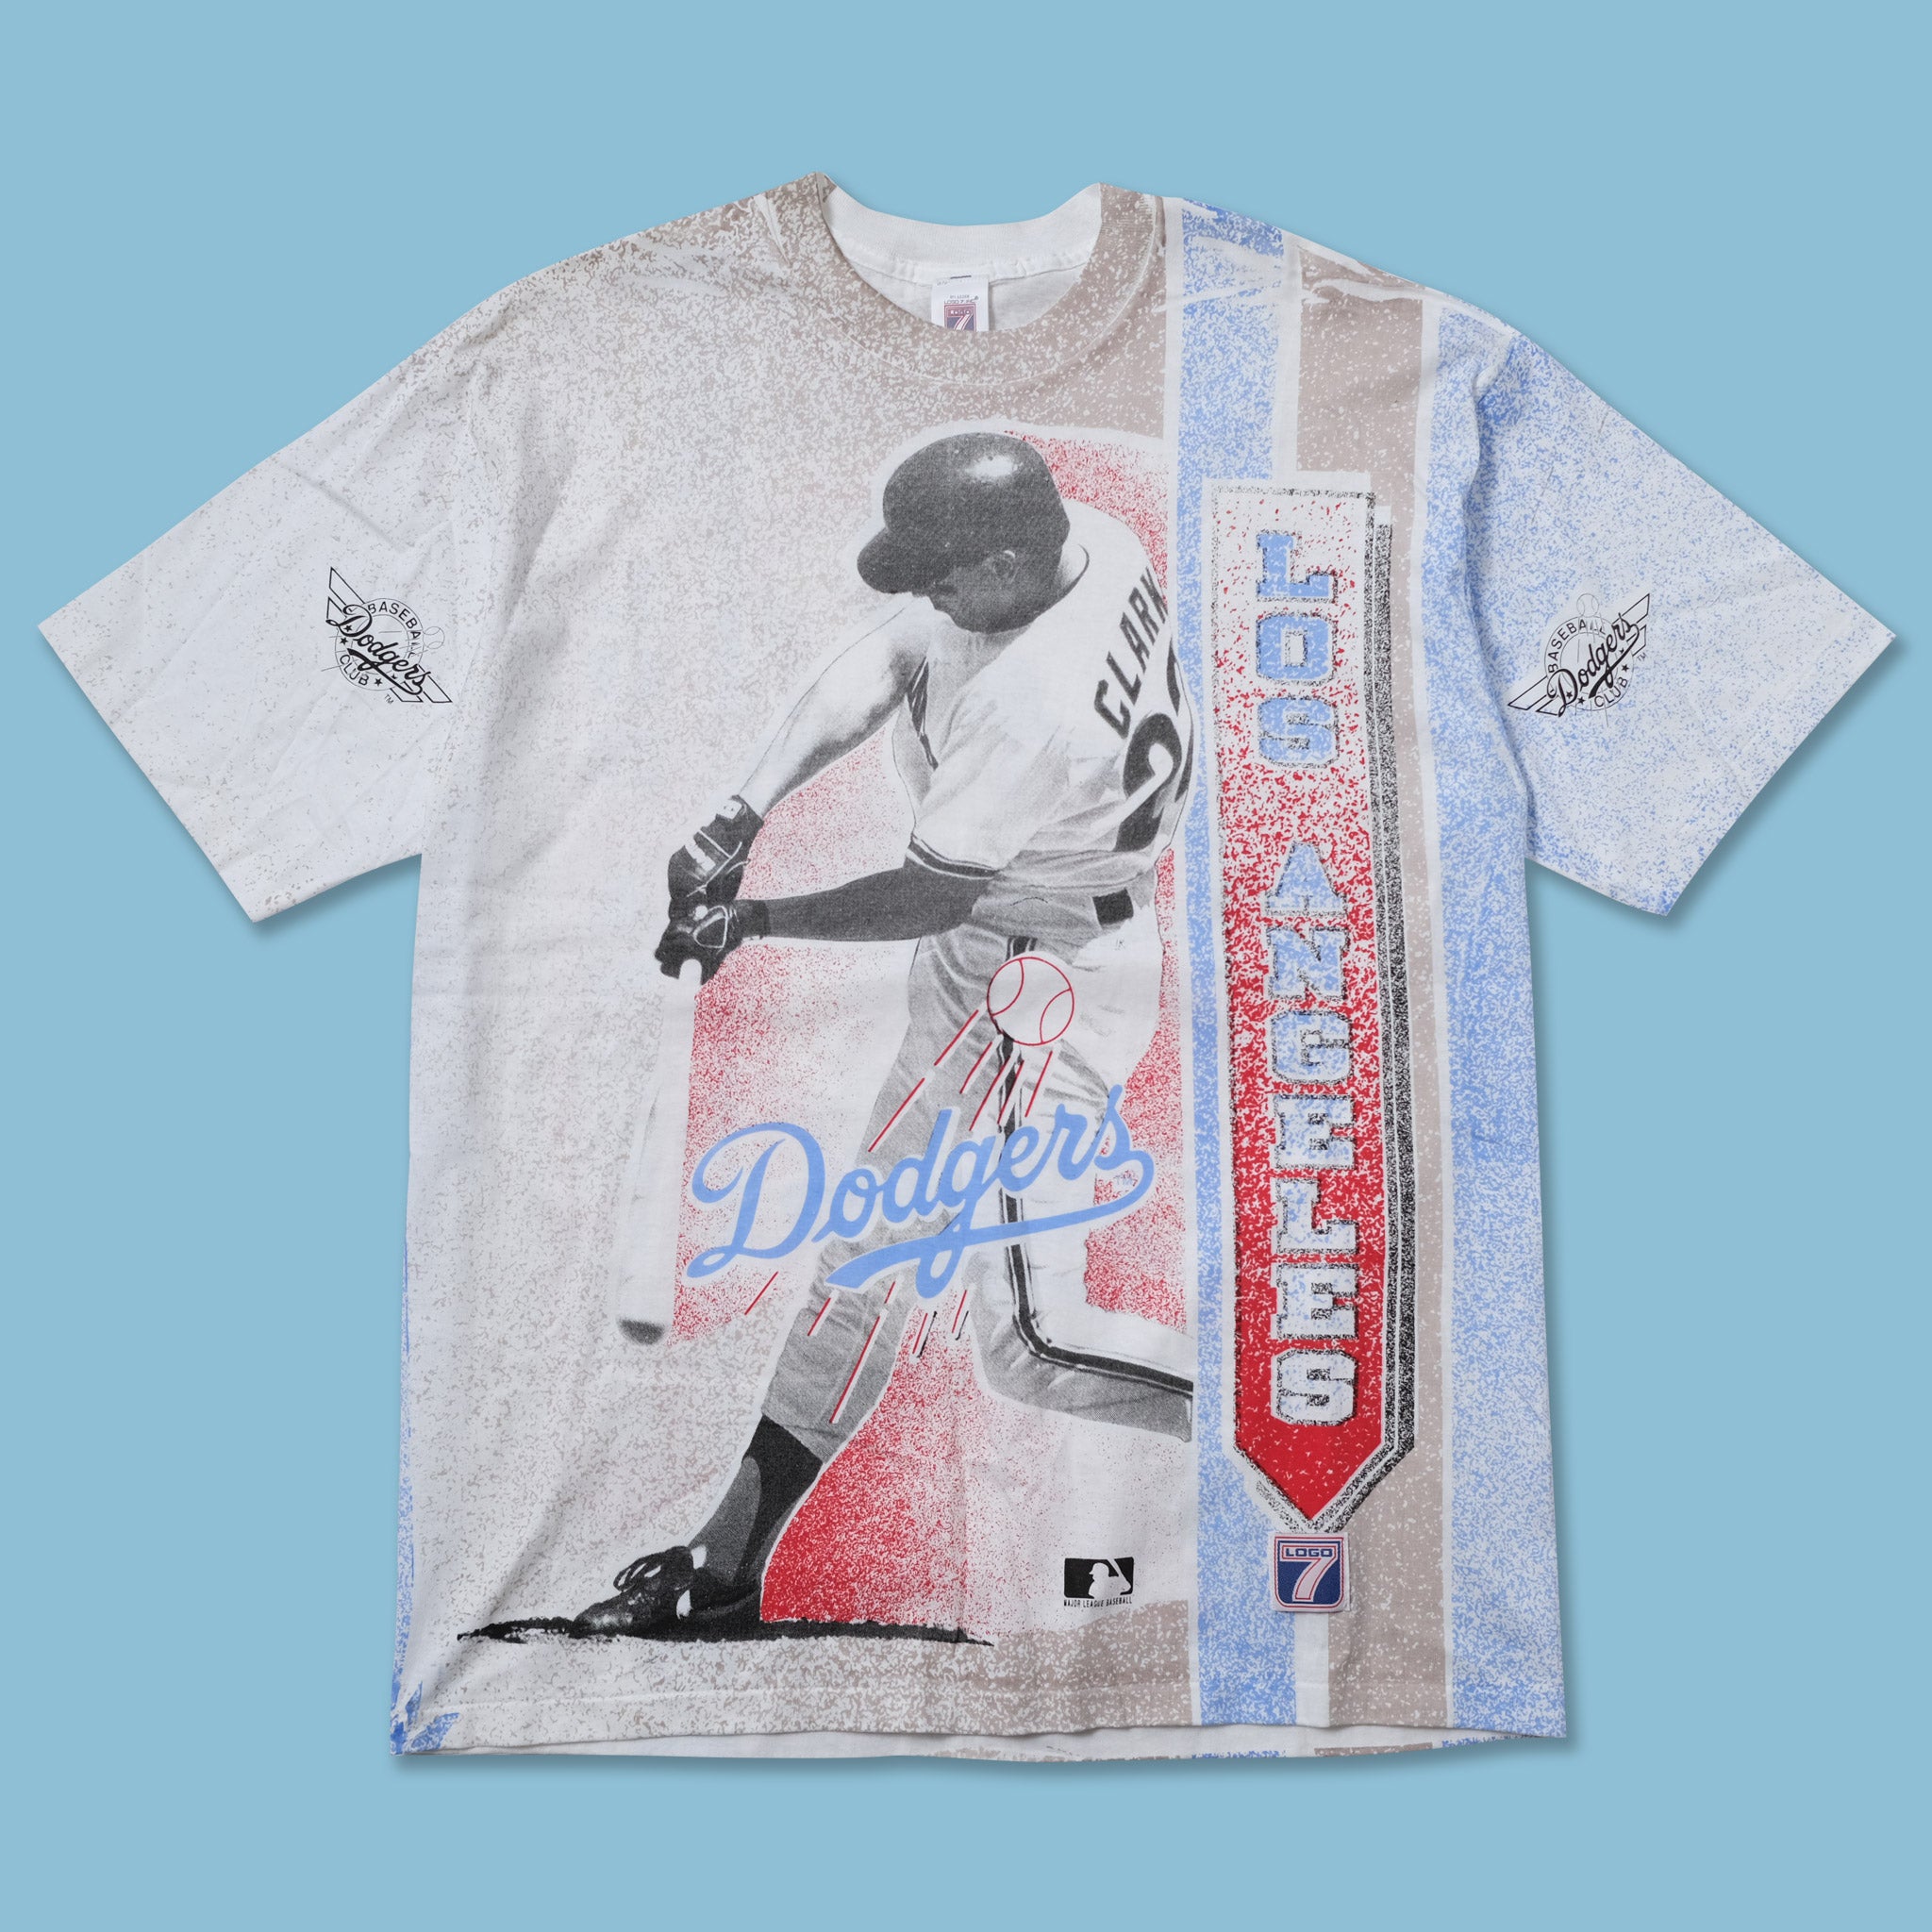 New Dodgers Baseball T-ShirtDodger Dogs Since 1962 T-Shirt Oversized t-shirt  man clothes fruit of the loom mens t shirts - AliExpress